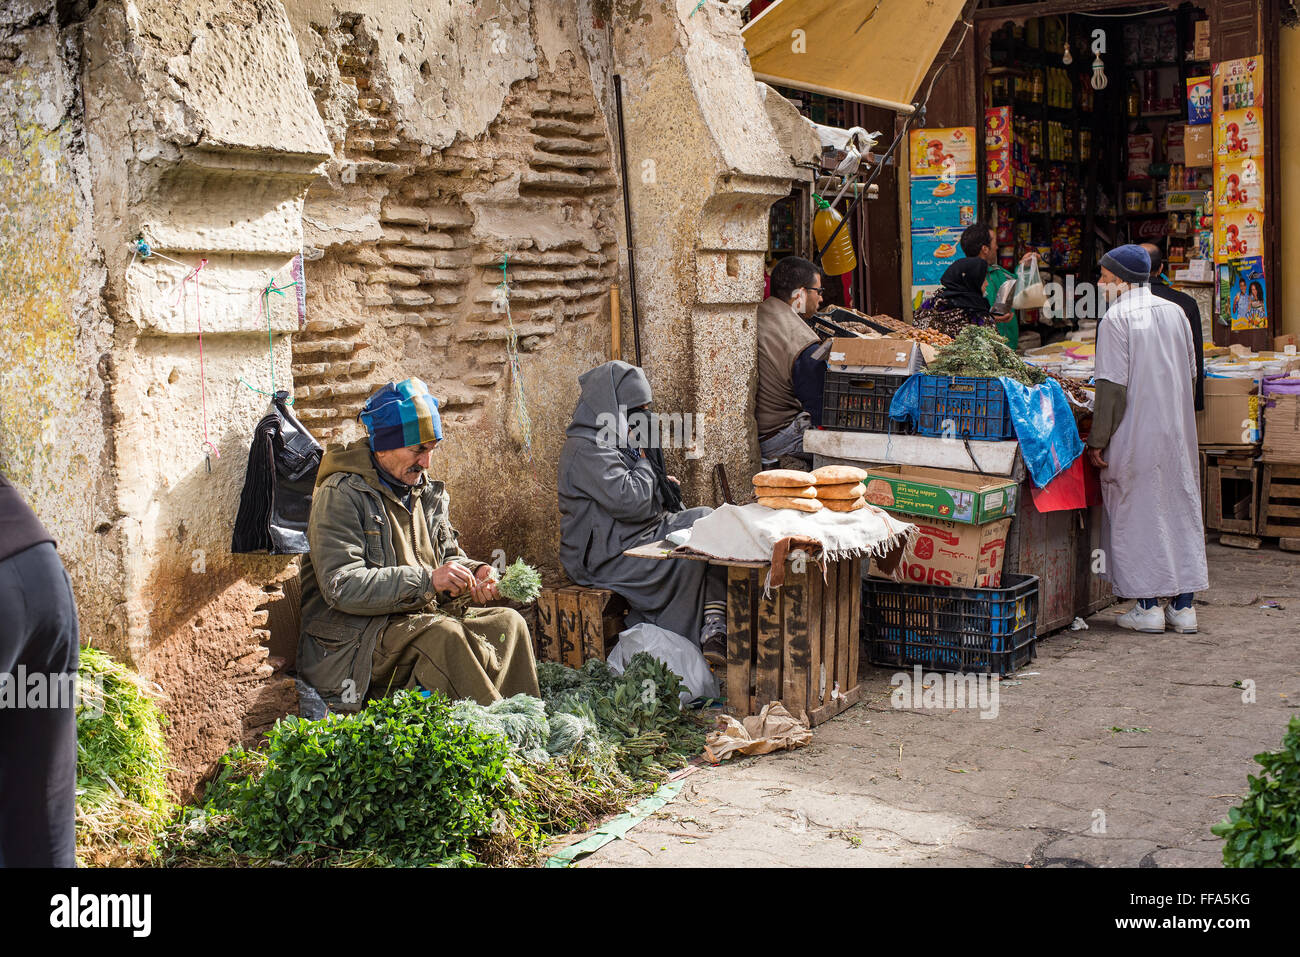 Man selling typical arabian aromatic herbs in a tipycal street of Meknes medina. Meknes, Morocco Stock Photo